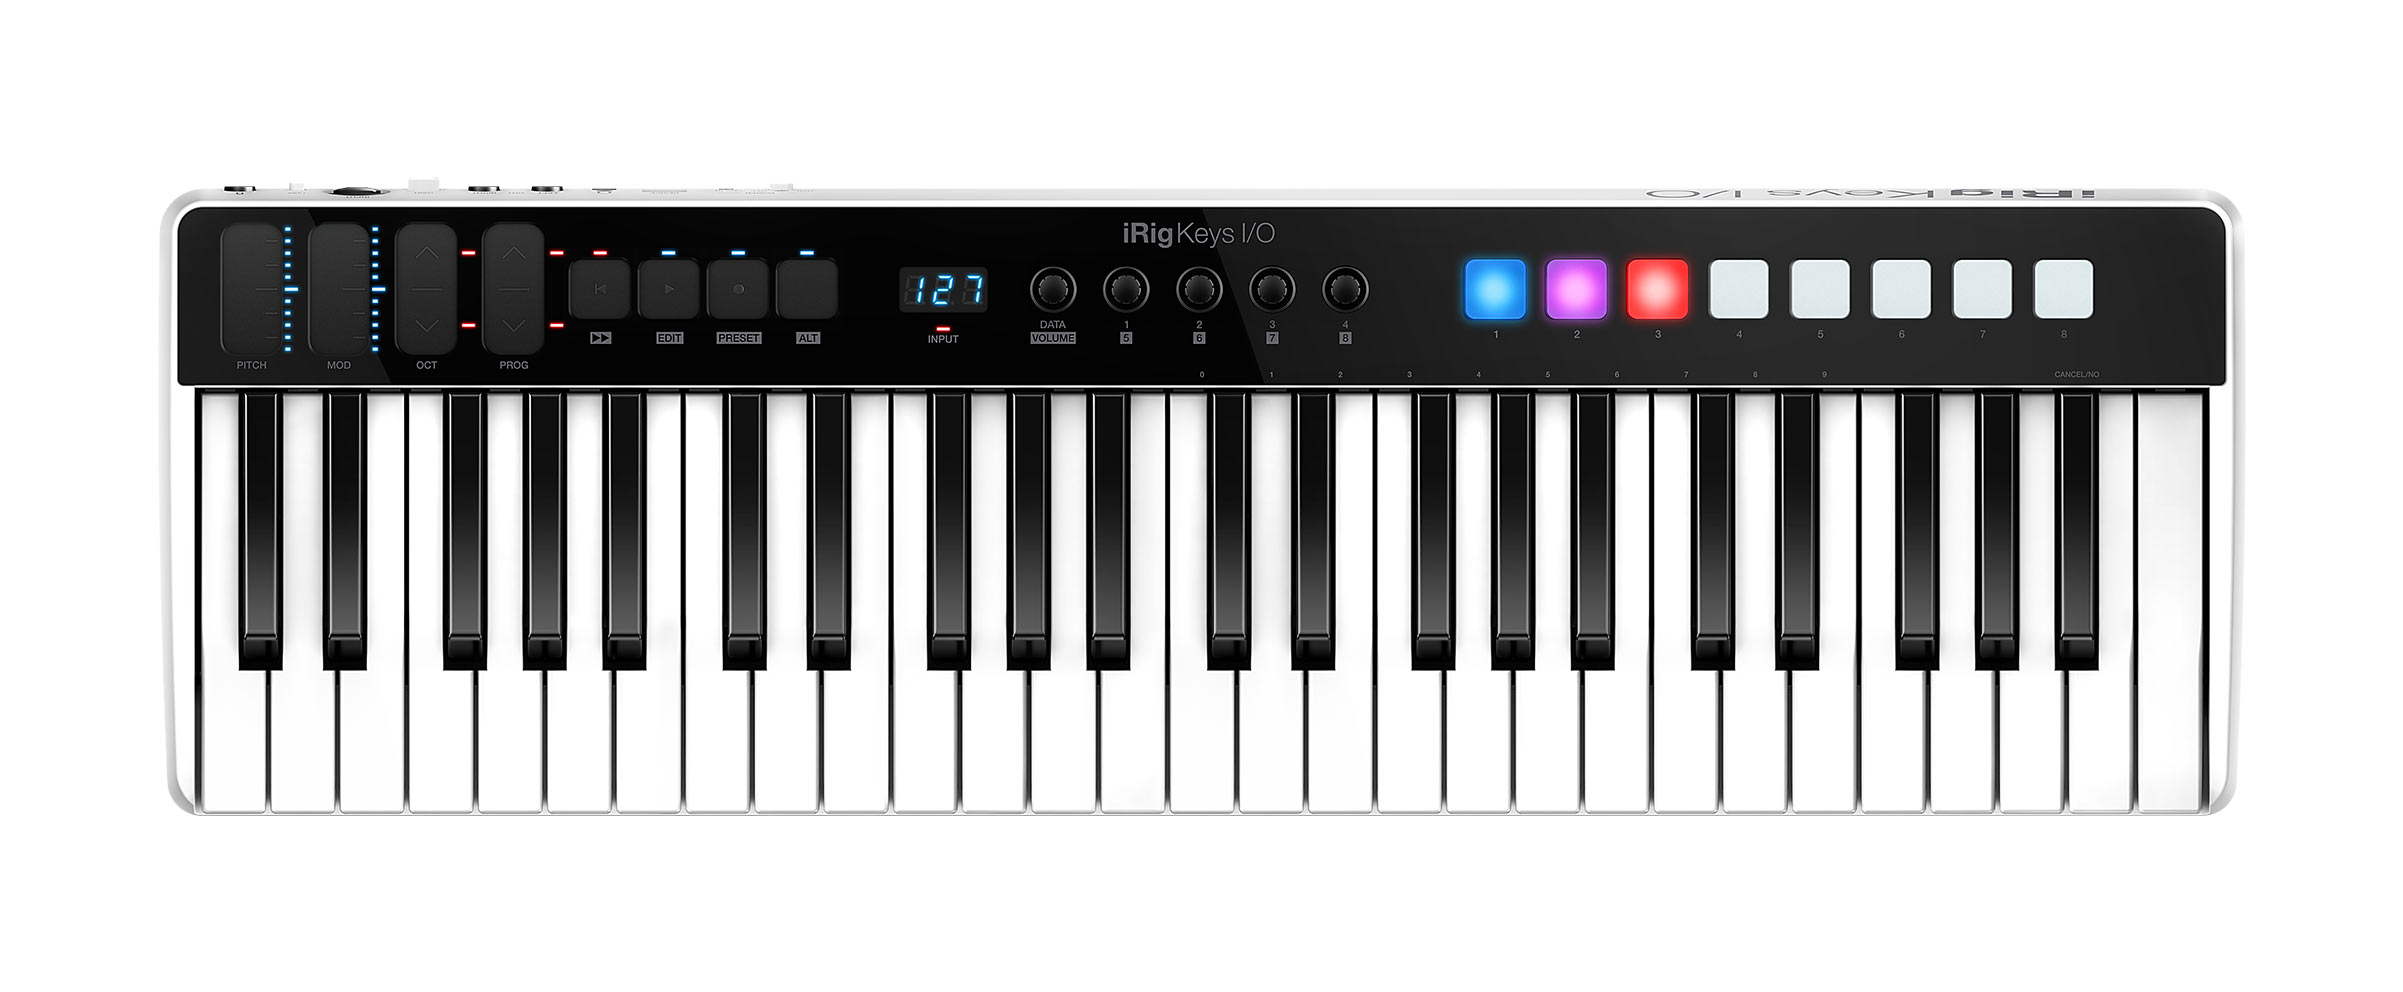 how can you map studio one instruments to comuter keys?